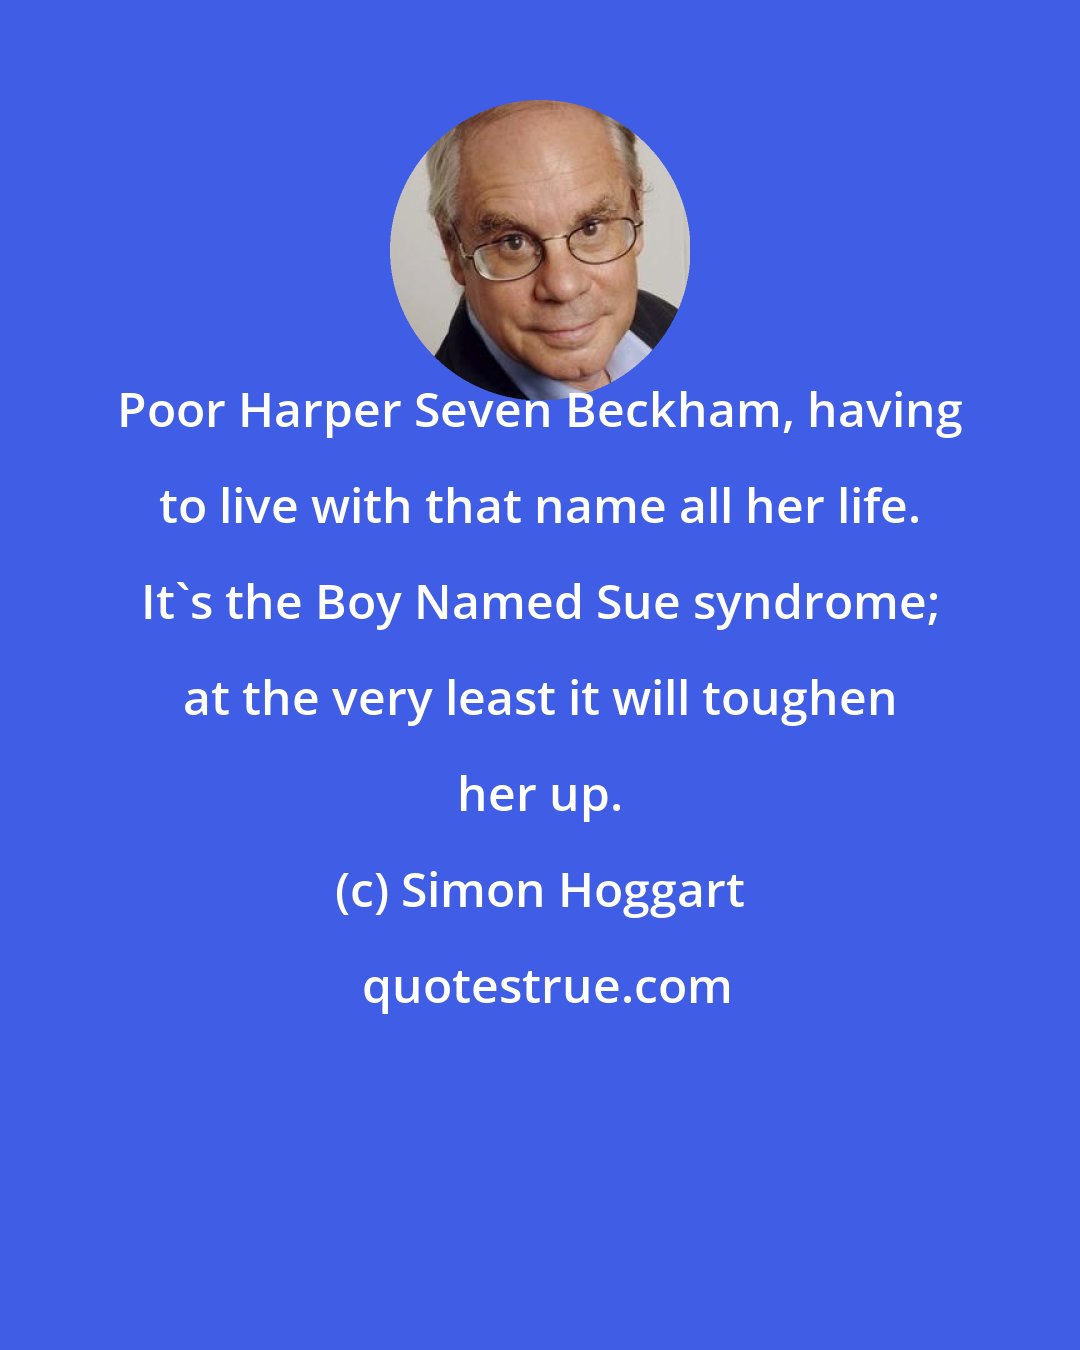 Simon Hoggart: Poor Harper Seven Beckham, having to live with that name all her life. It's the Boy Named Sue syndrome; at the very least it will toughen her up.